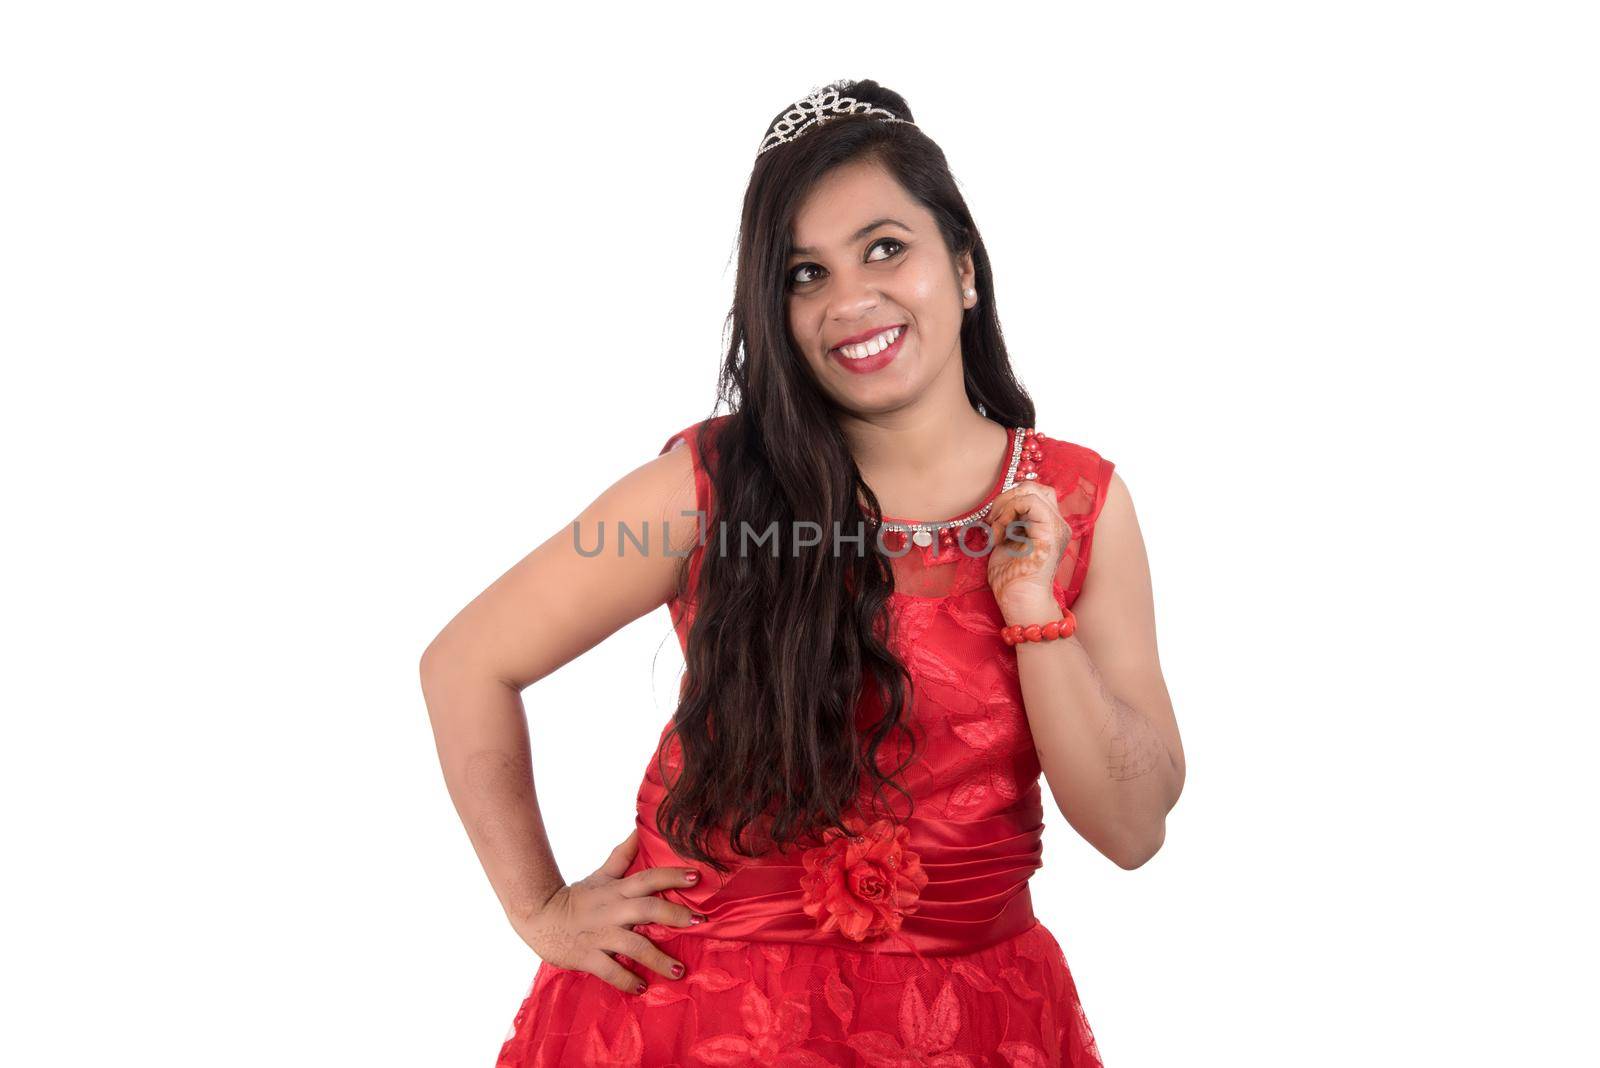 Young girl in red dress posing on white background by DipakShelare